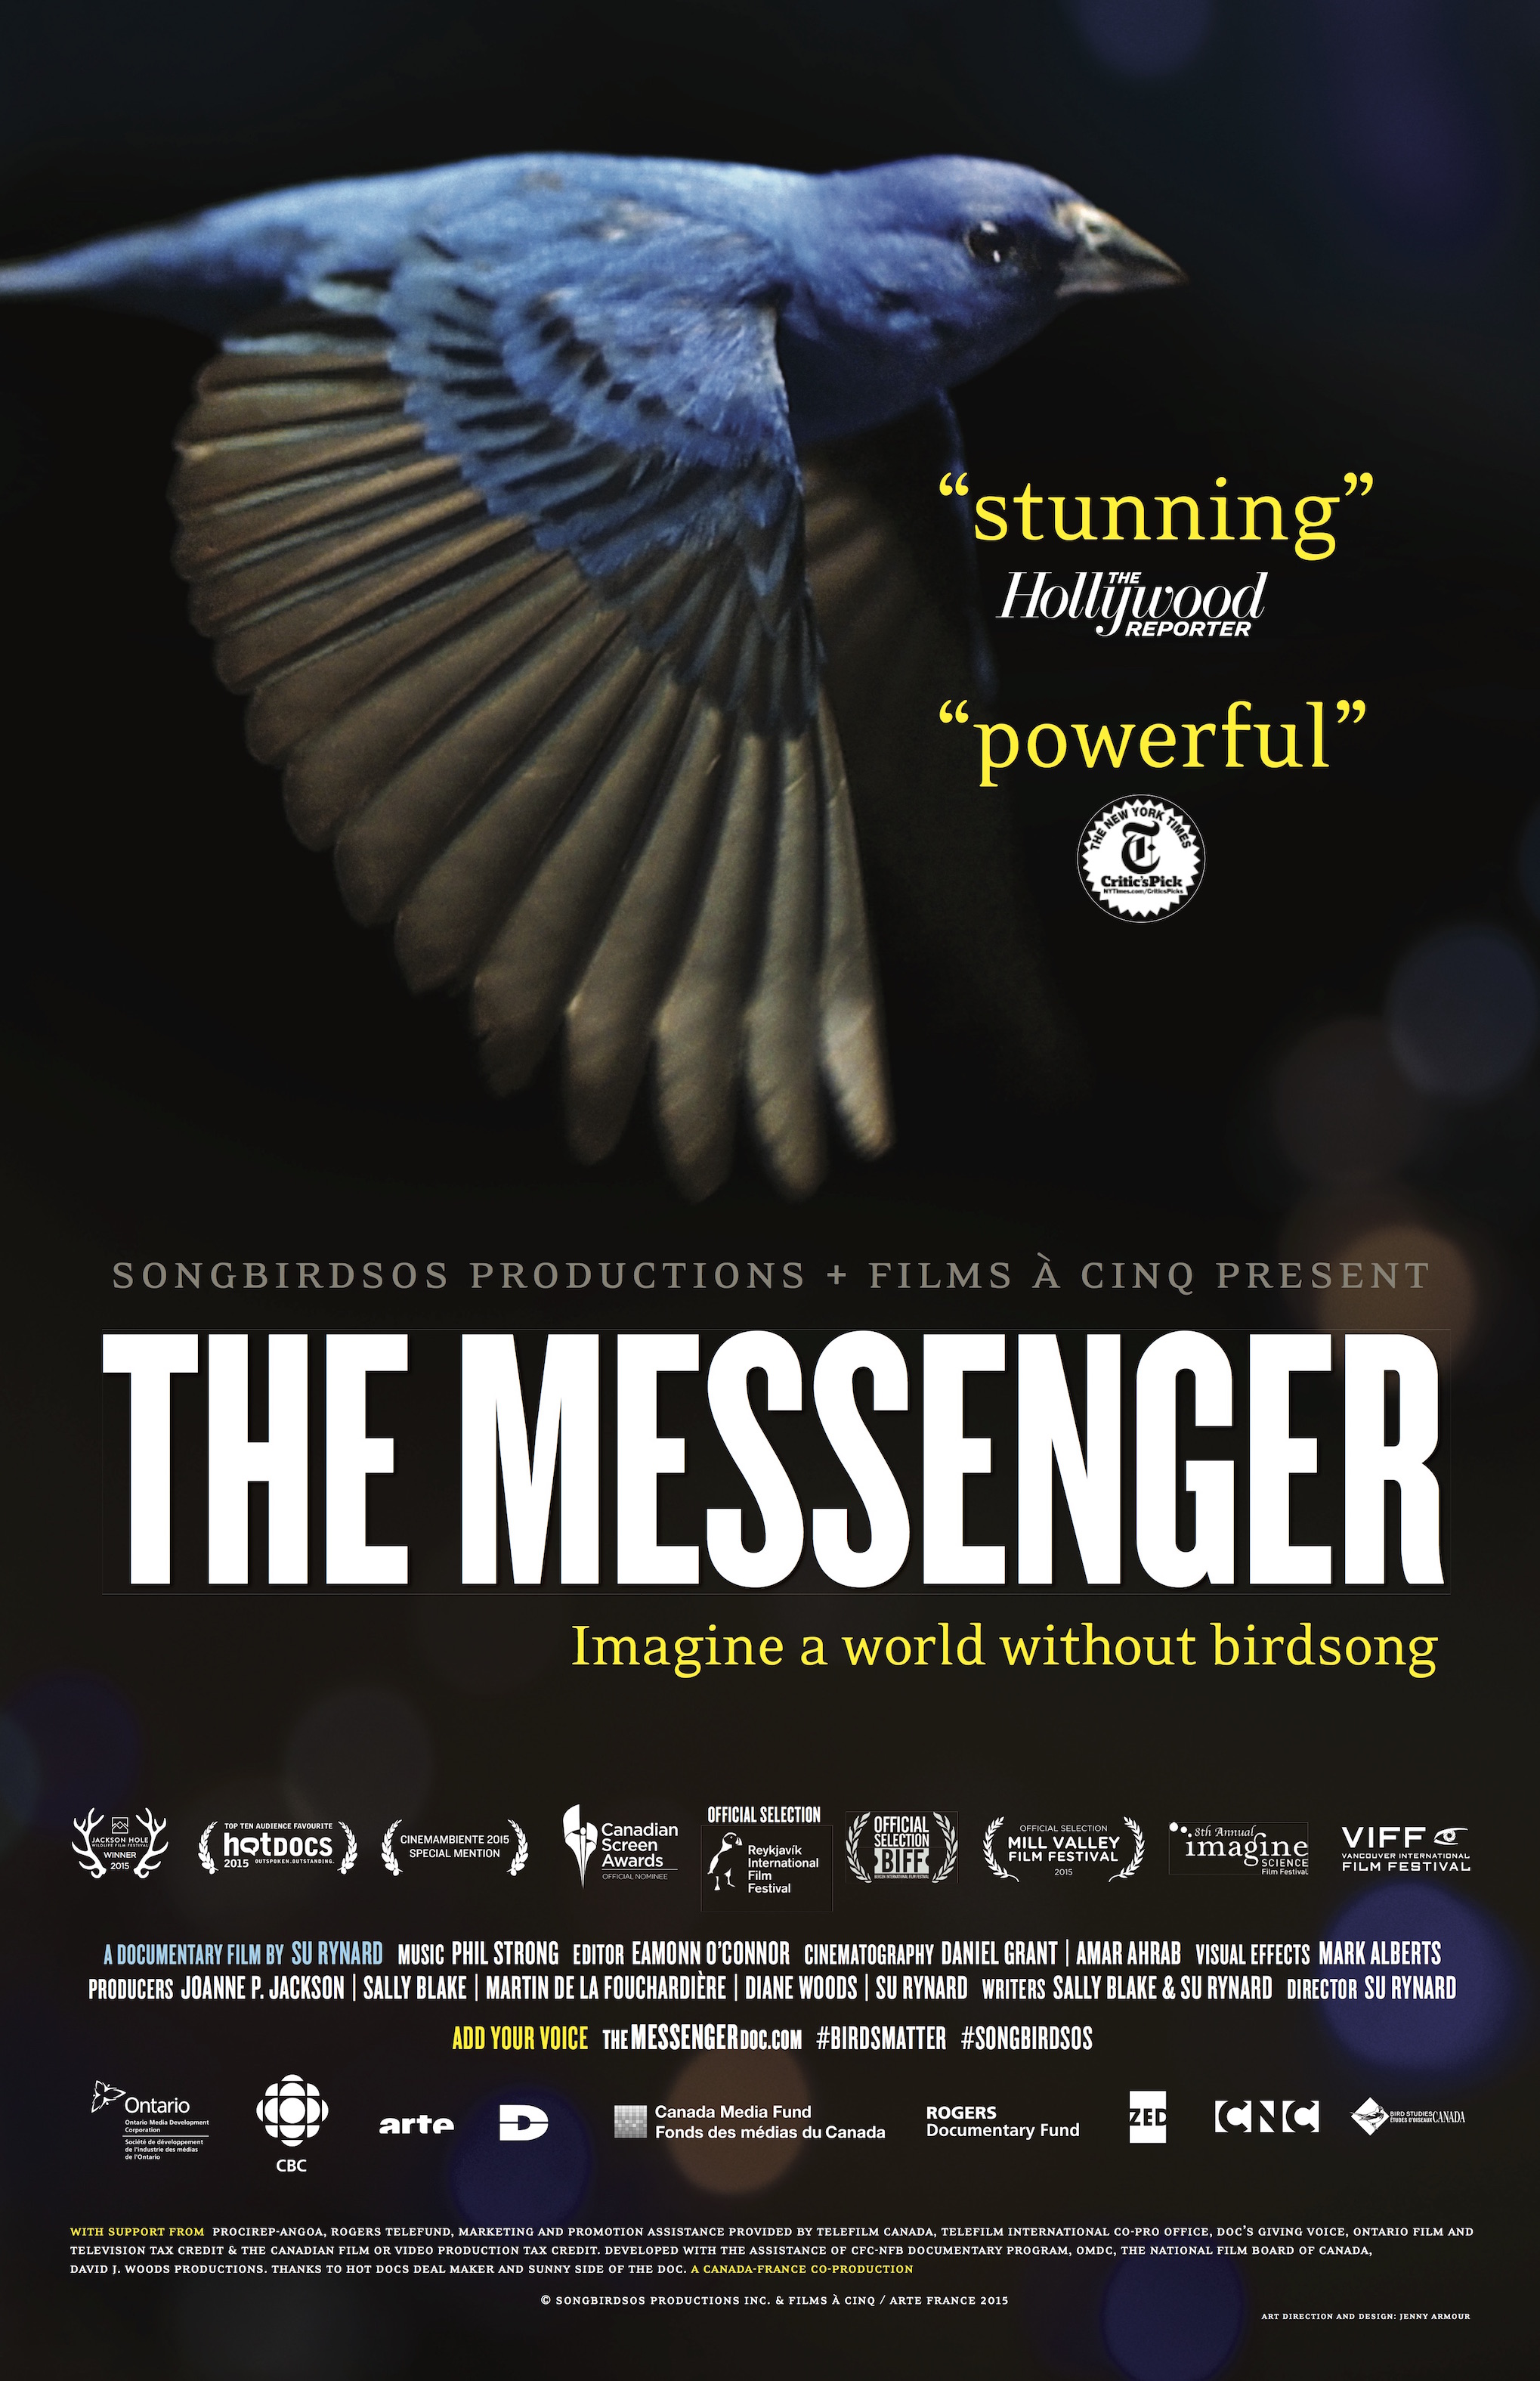 Poster for the documentary the Messenger.